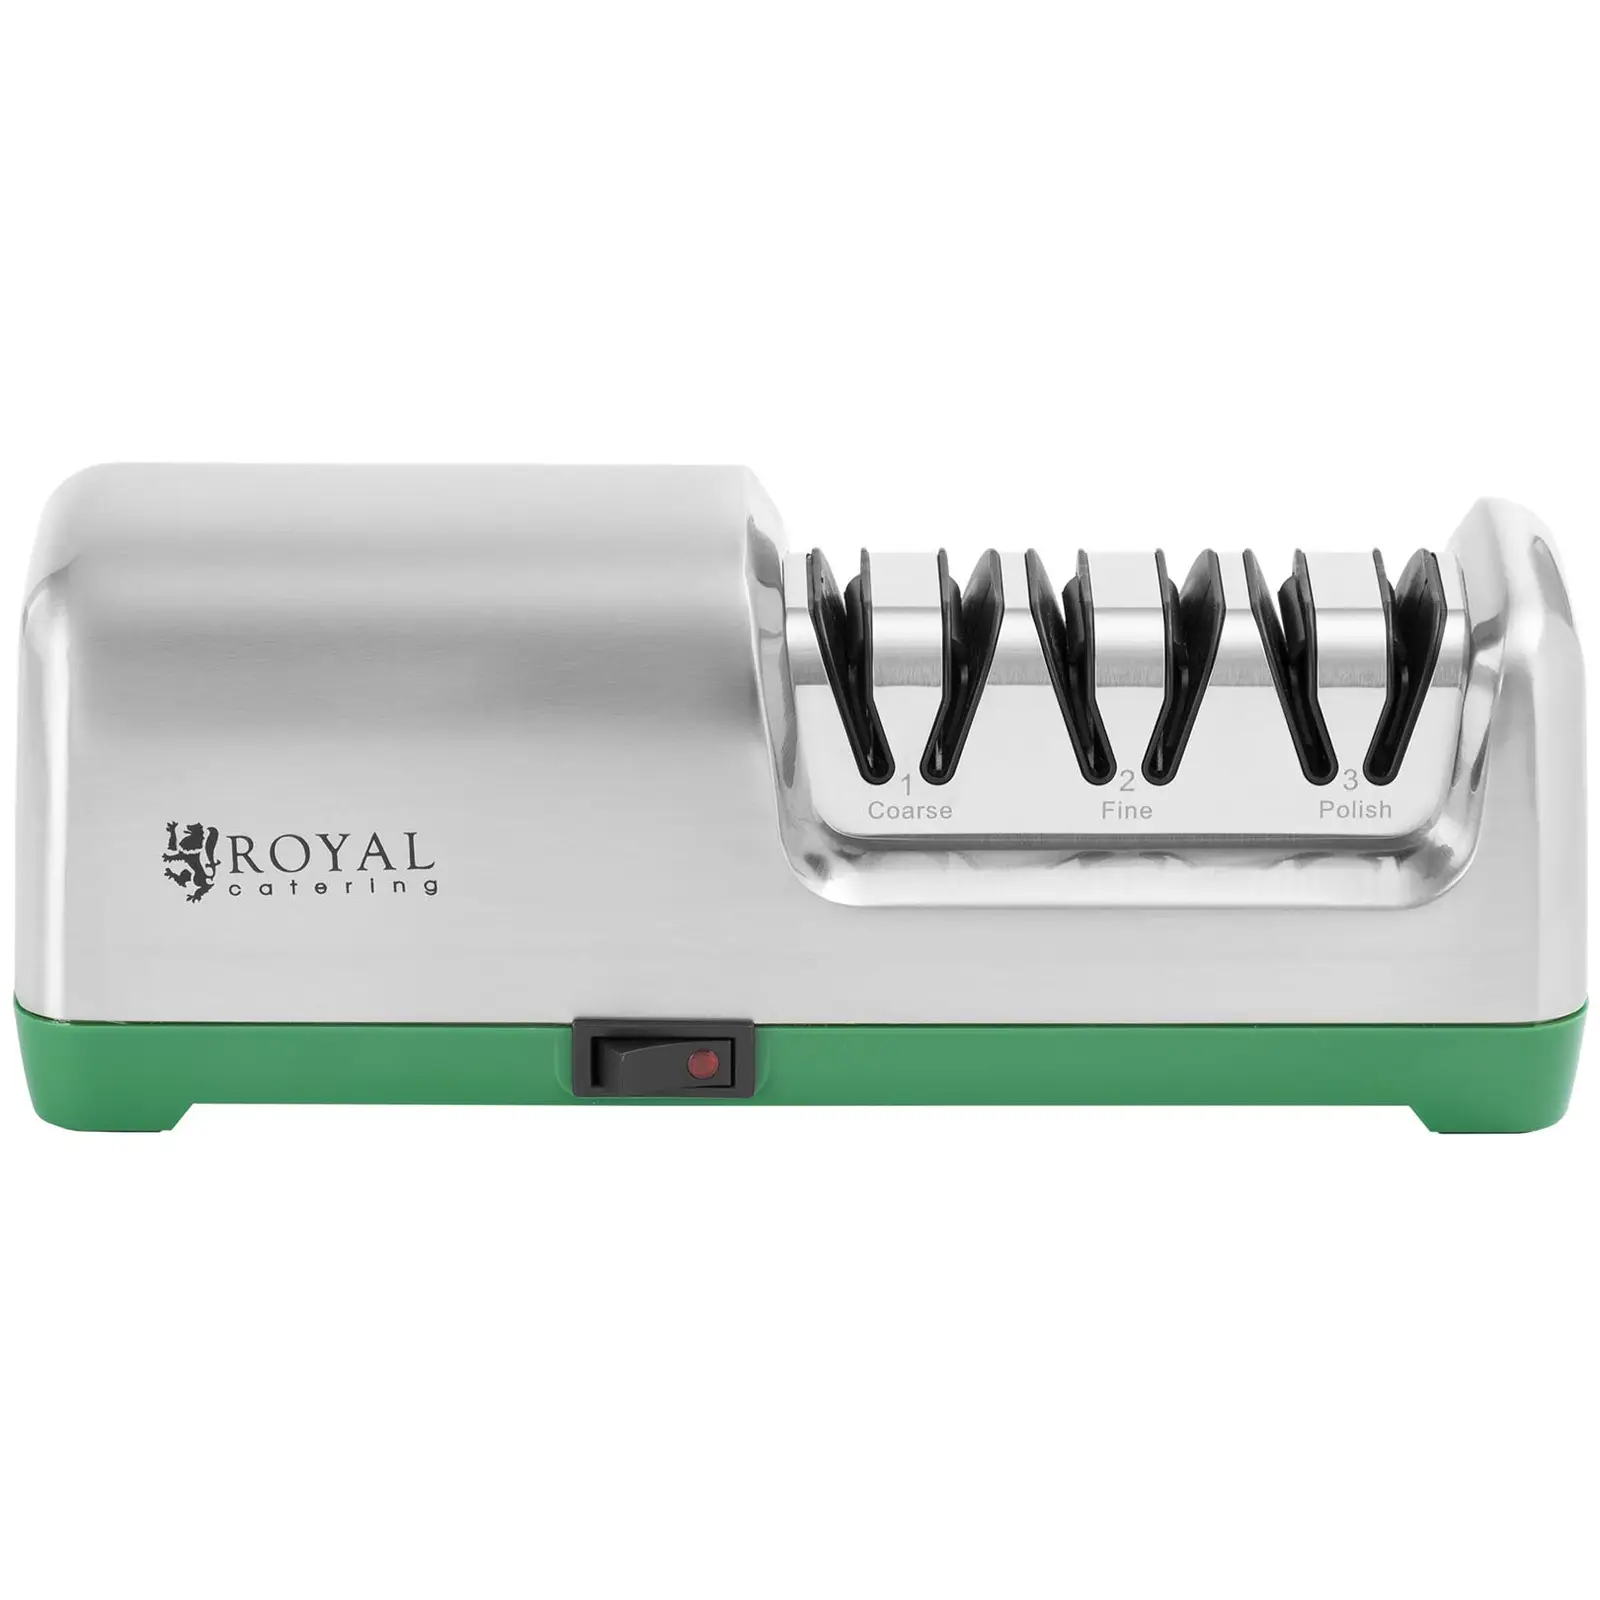 Electric Diamond Knife Sharpener - 3 levels - 20° - zinc alloy - Royal Catering